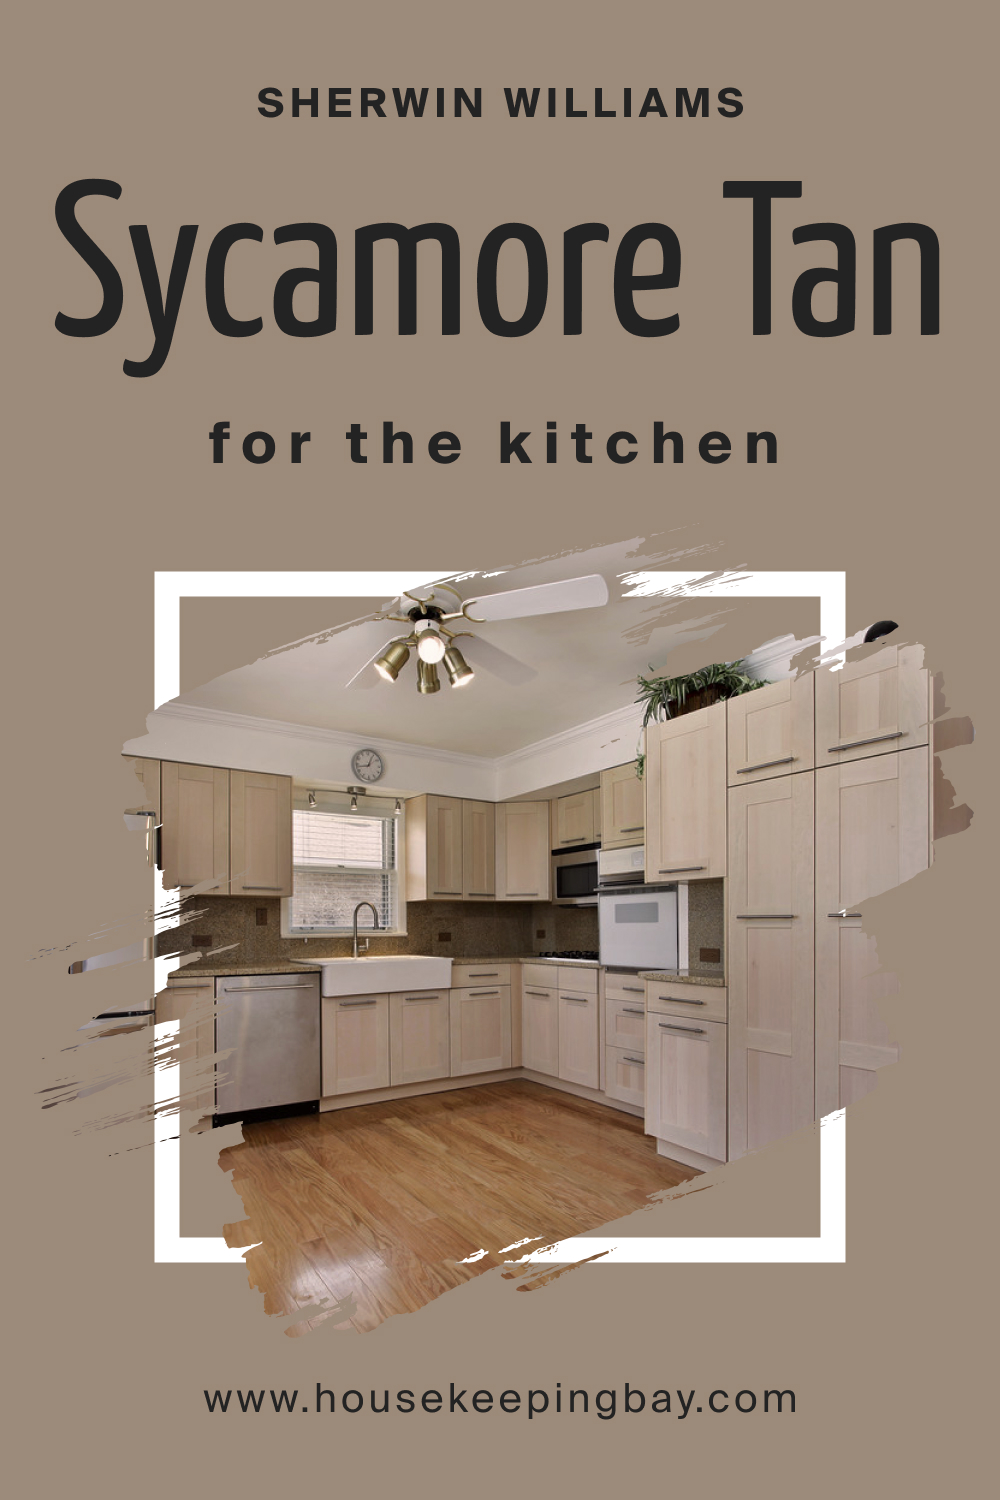 Sherwin Williams. SW 2855 Sycamore Tan For the Kitchens